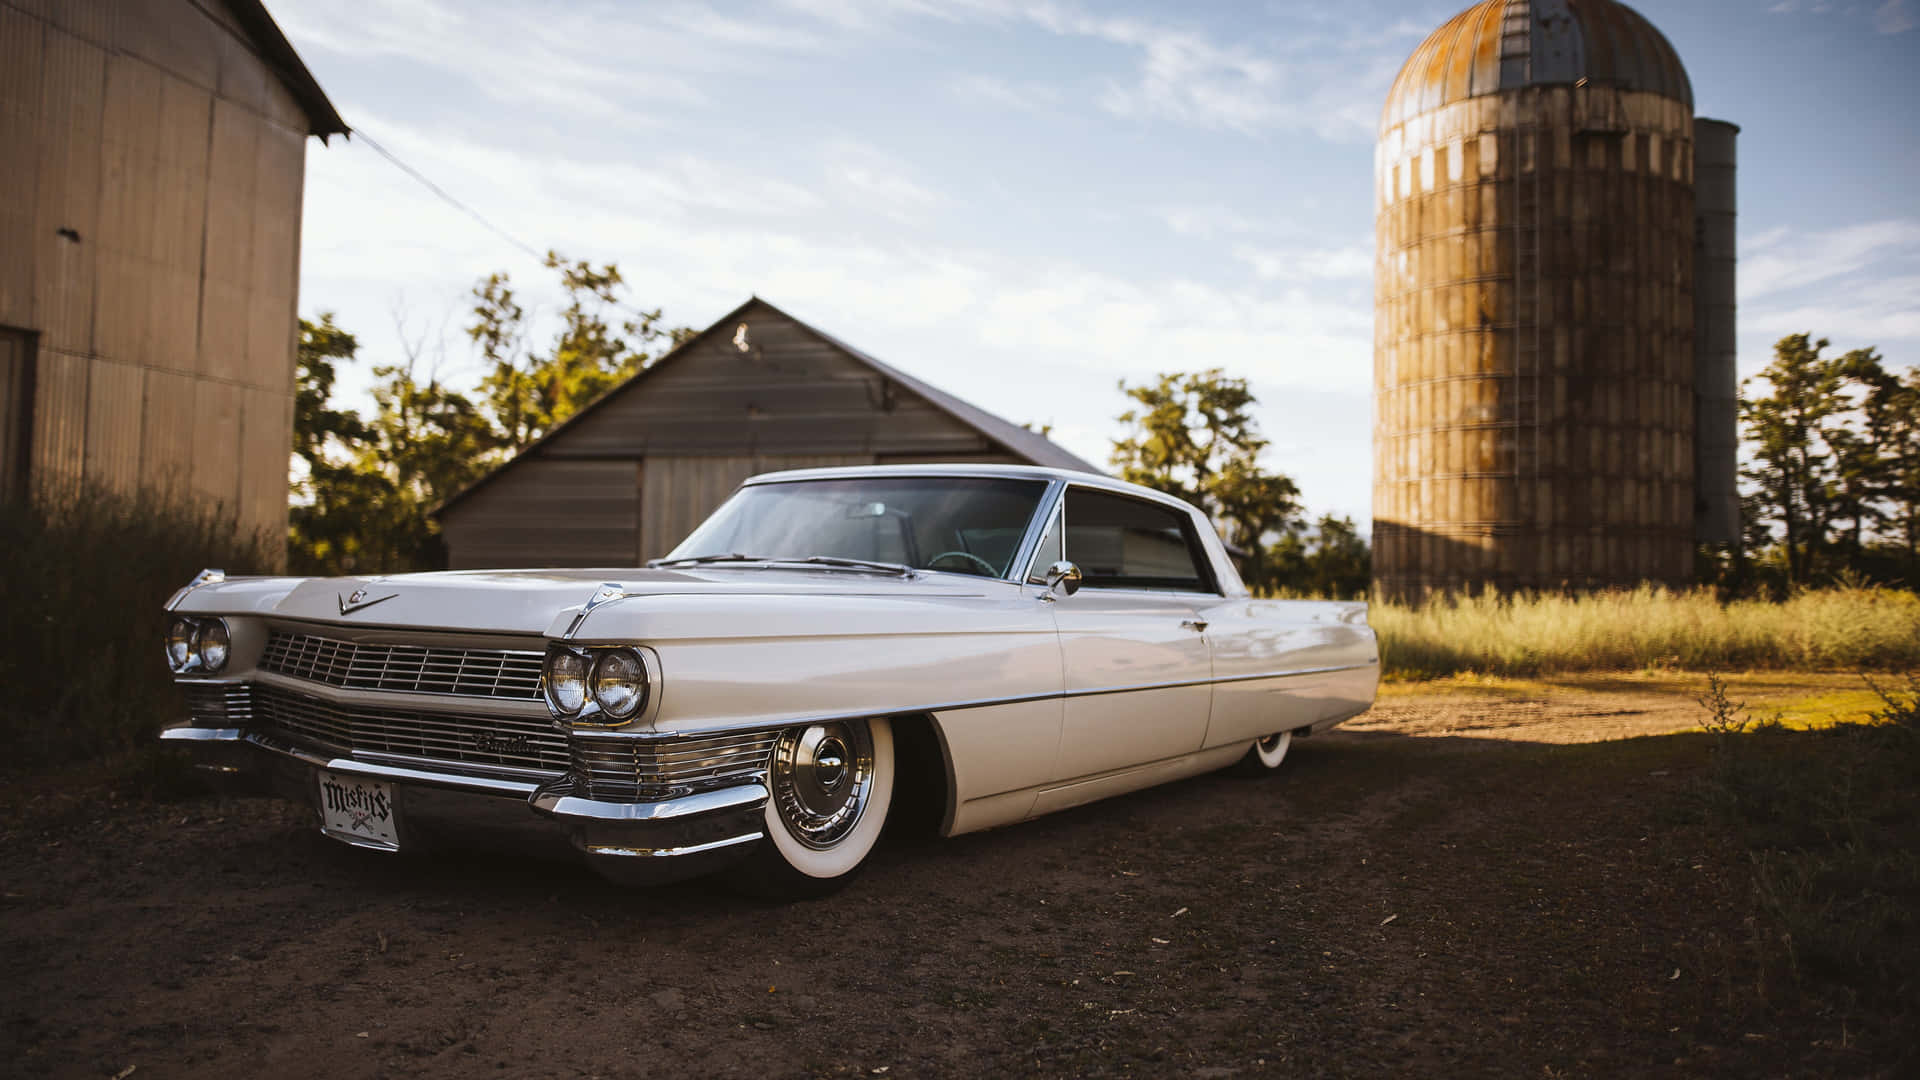 Sleek and Sophisticated Cadillac Deville Wallpaper